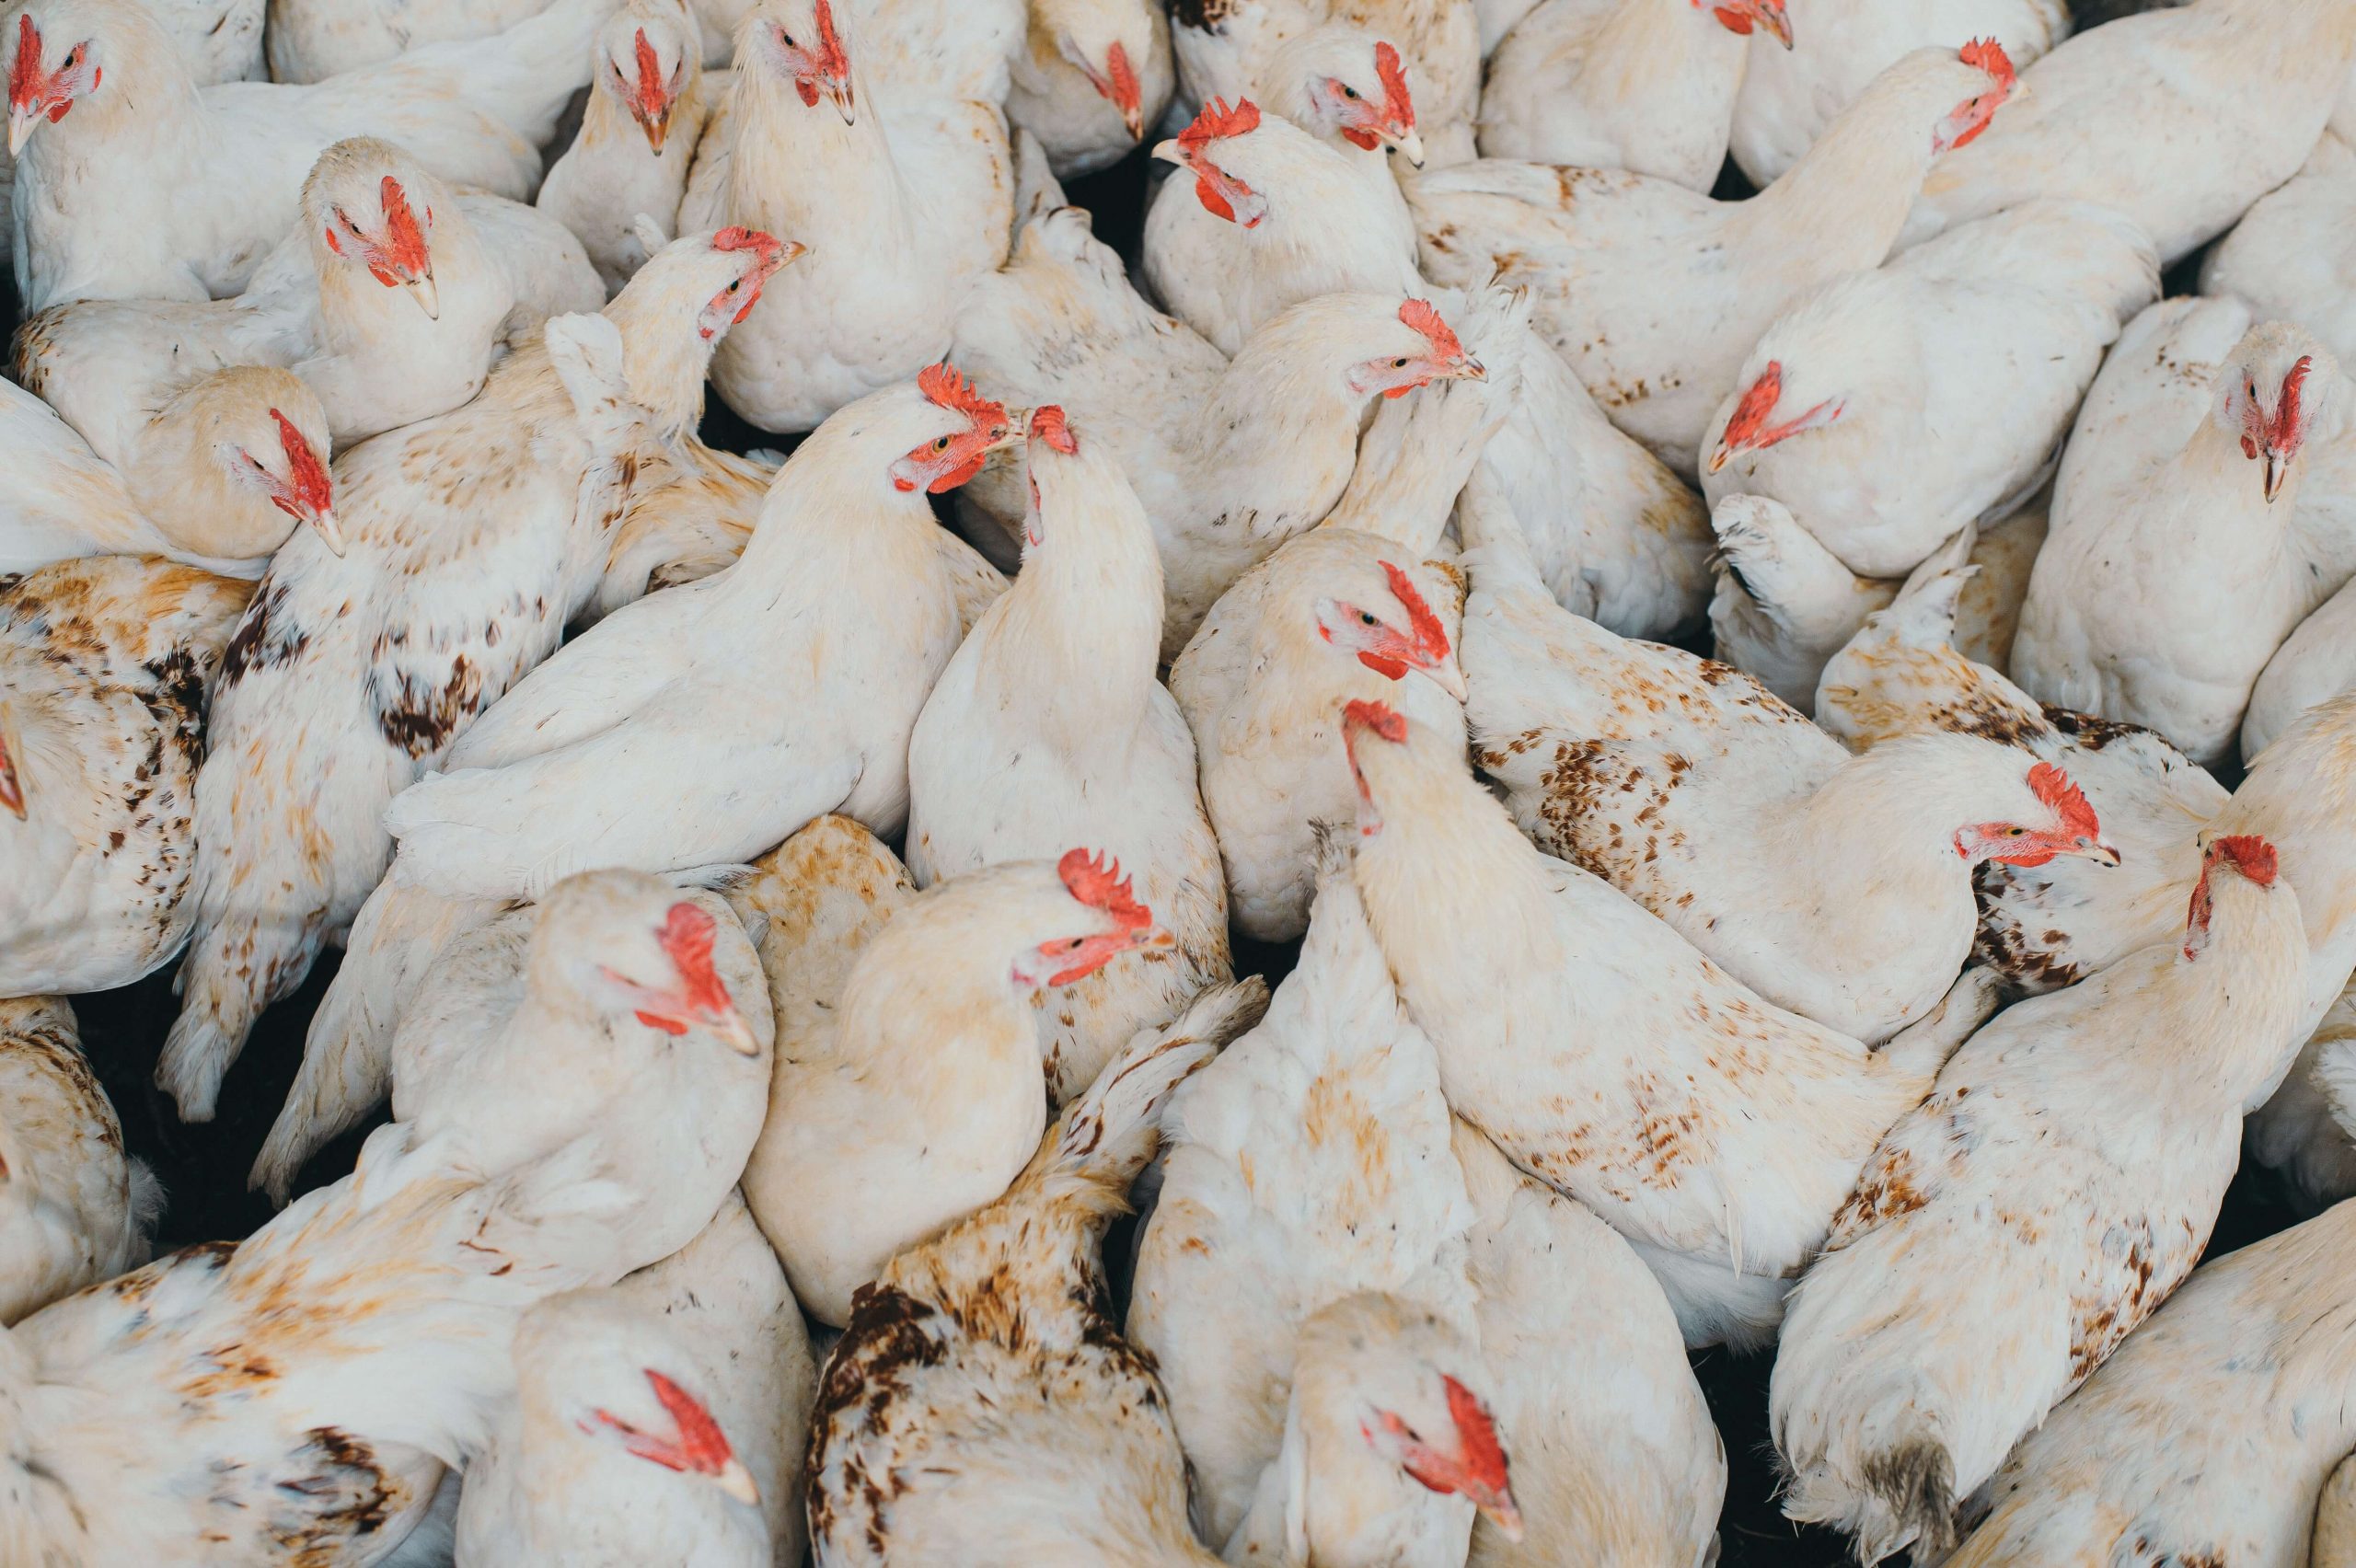 Biosecurity in Poultry farms?